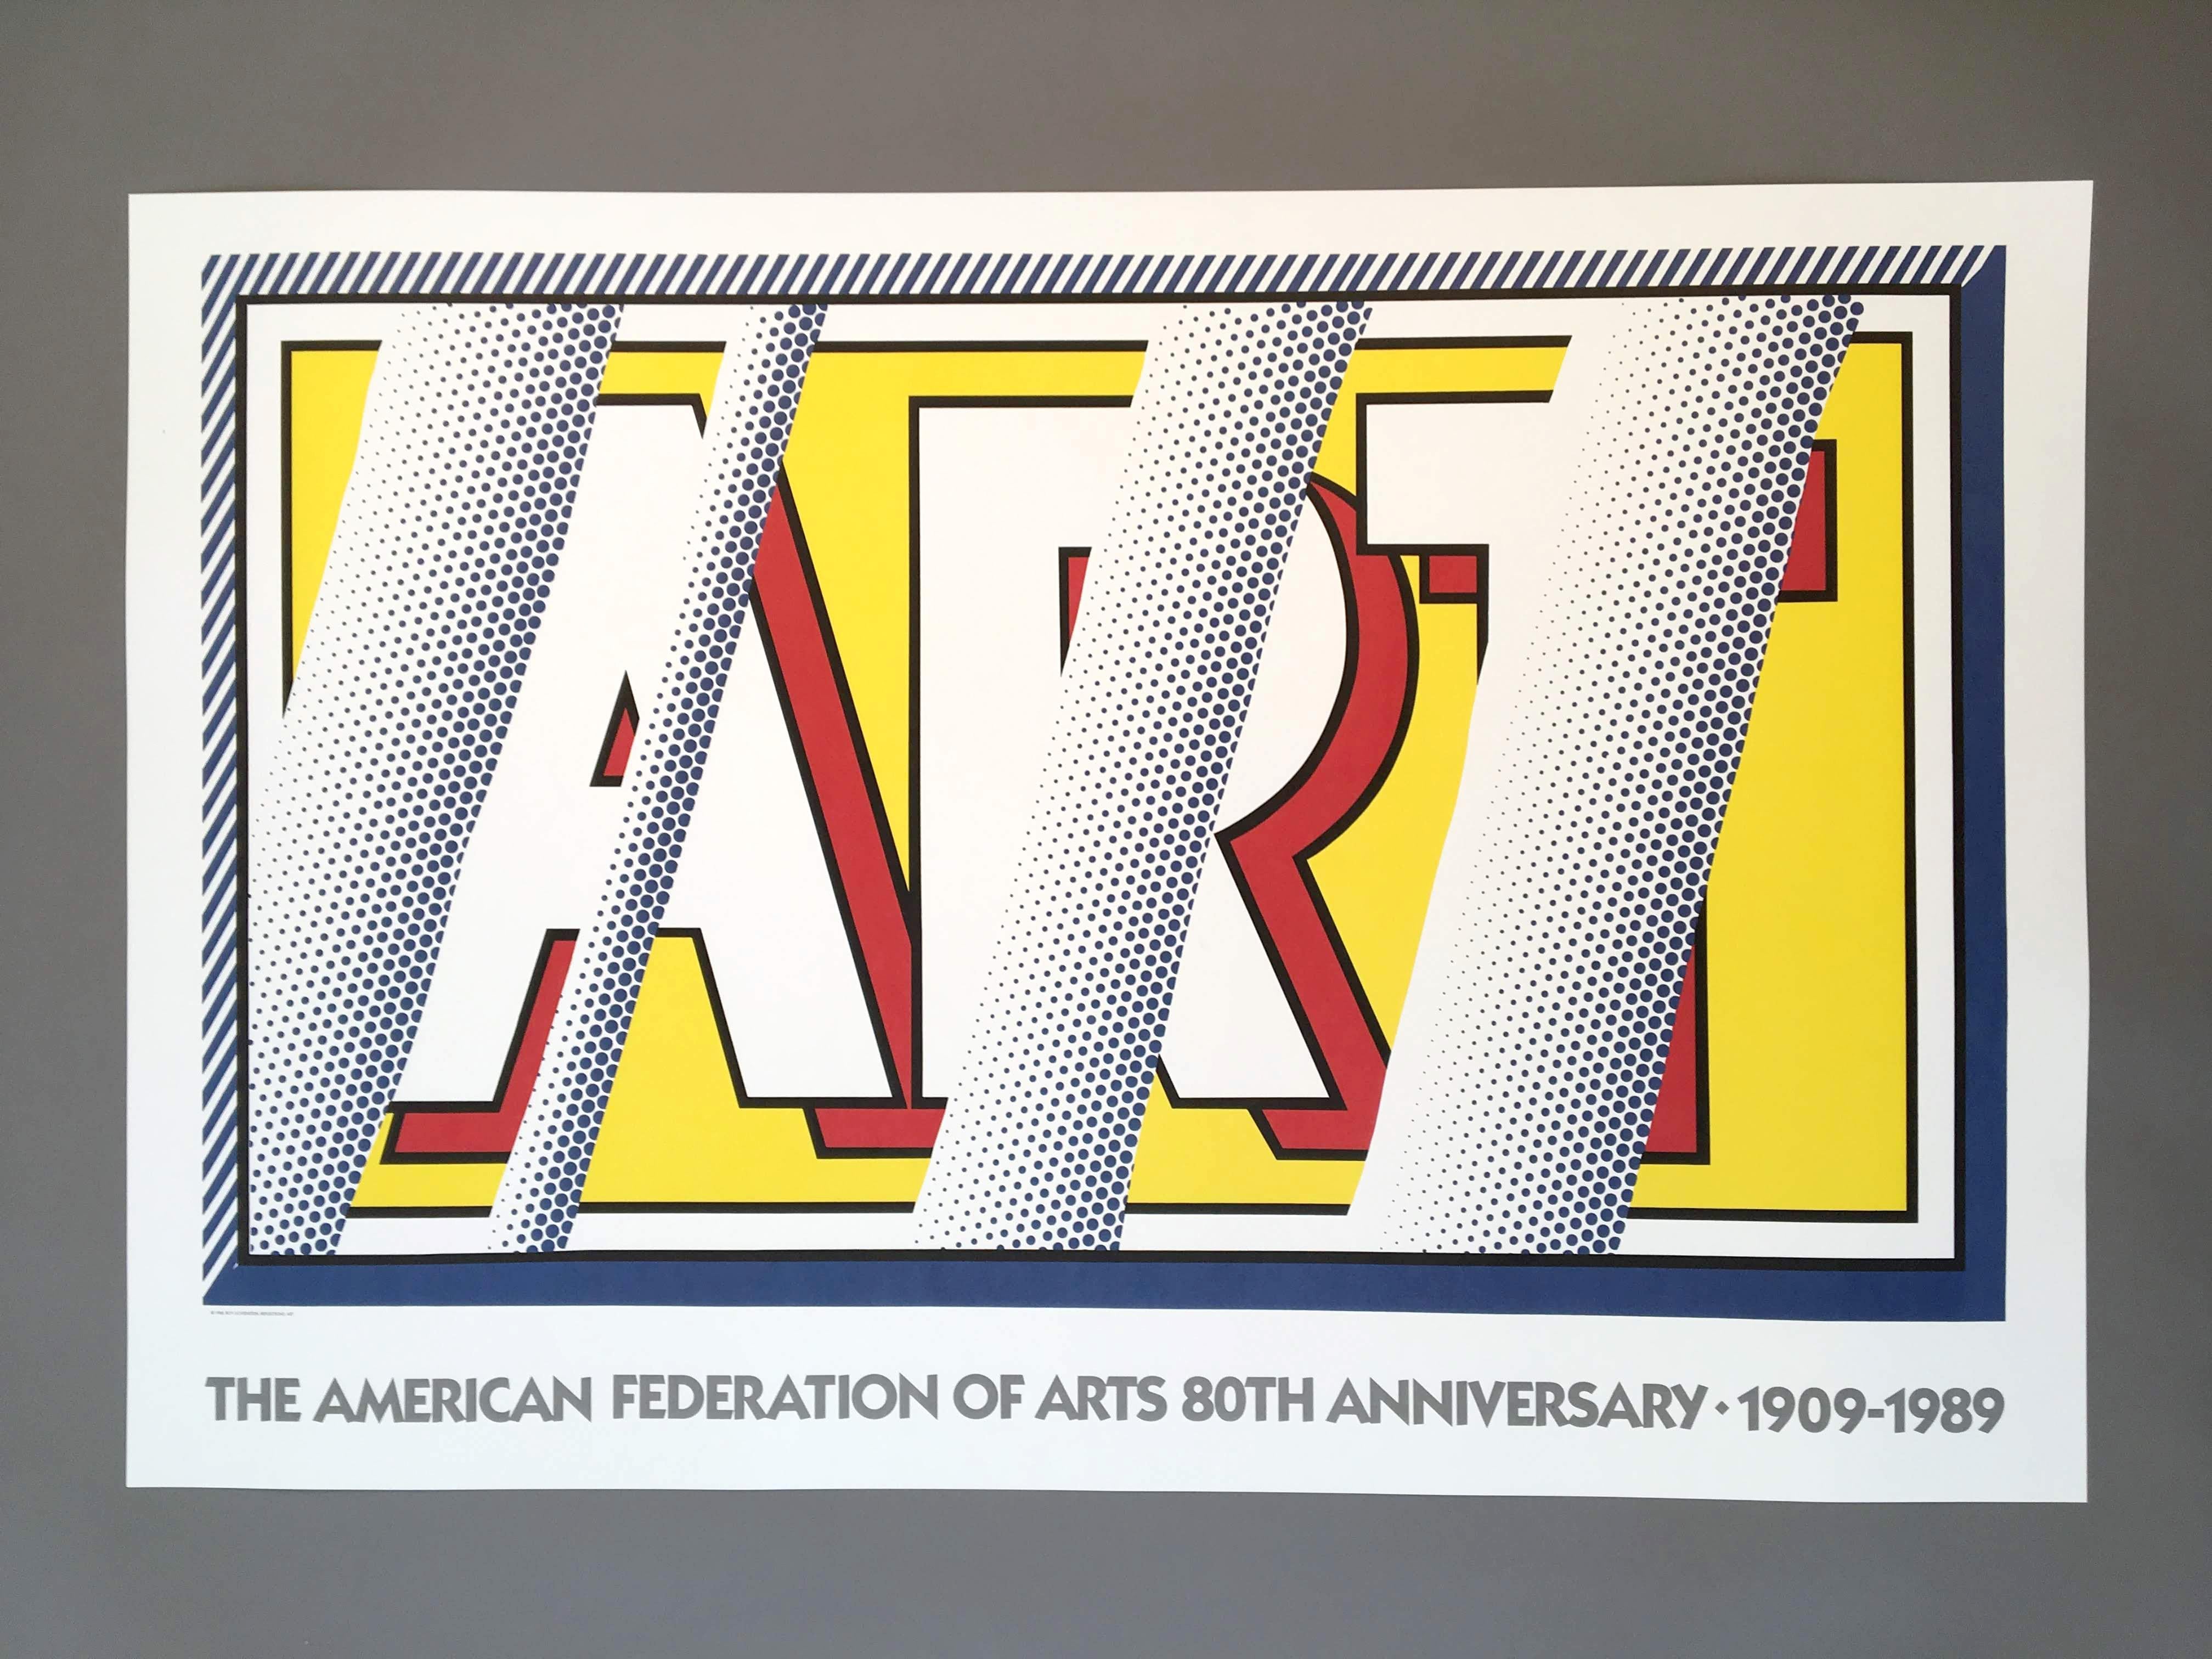 Roy Lichtenstein (United States, 1923-1997)
'Reflections: Art', 1989
 
The image features a modern reflection and adaptation of his iconic painting 'ART' from 1965. The poster was created in celebration of 'The American Federation of Arts' 80th